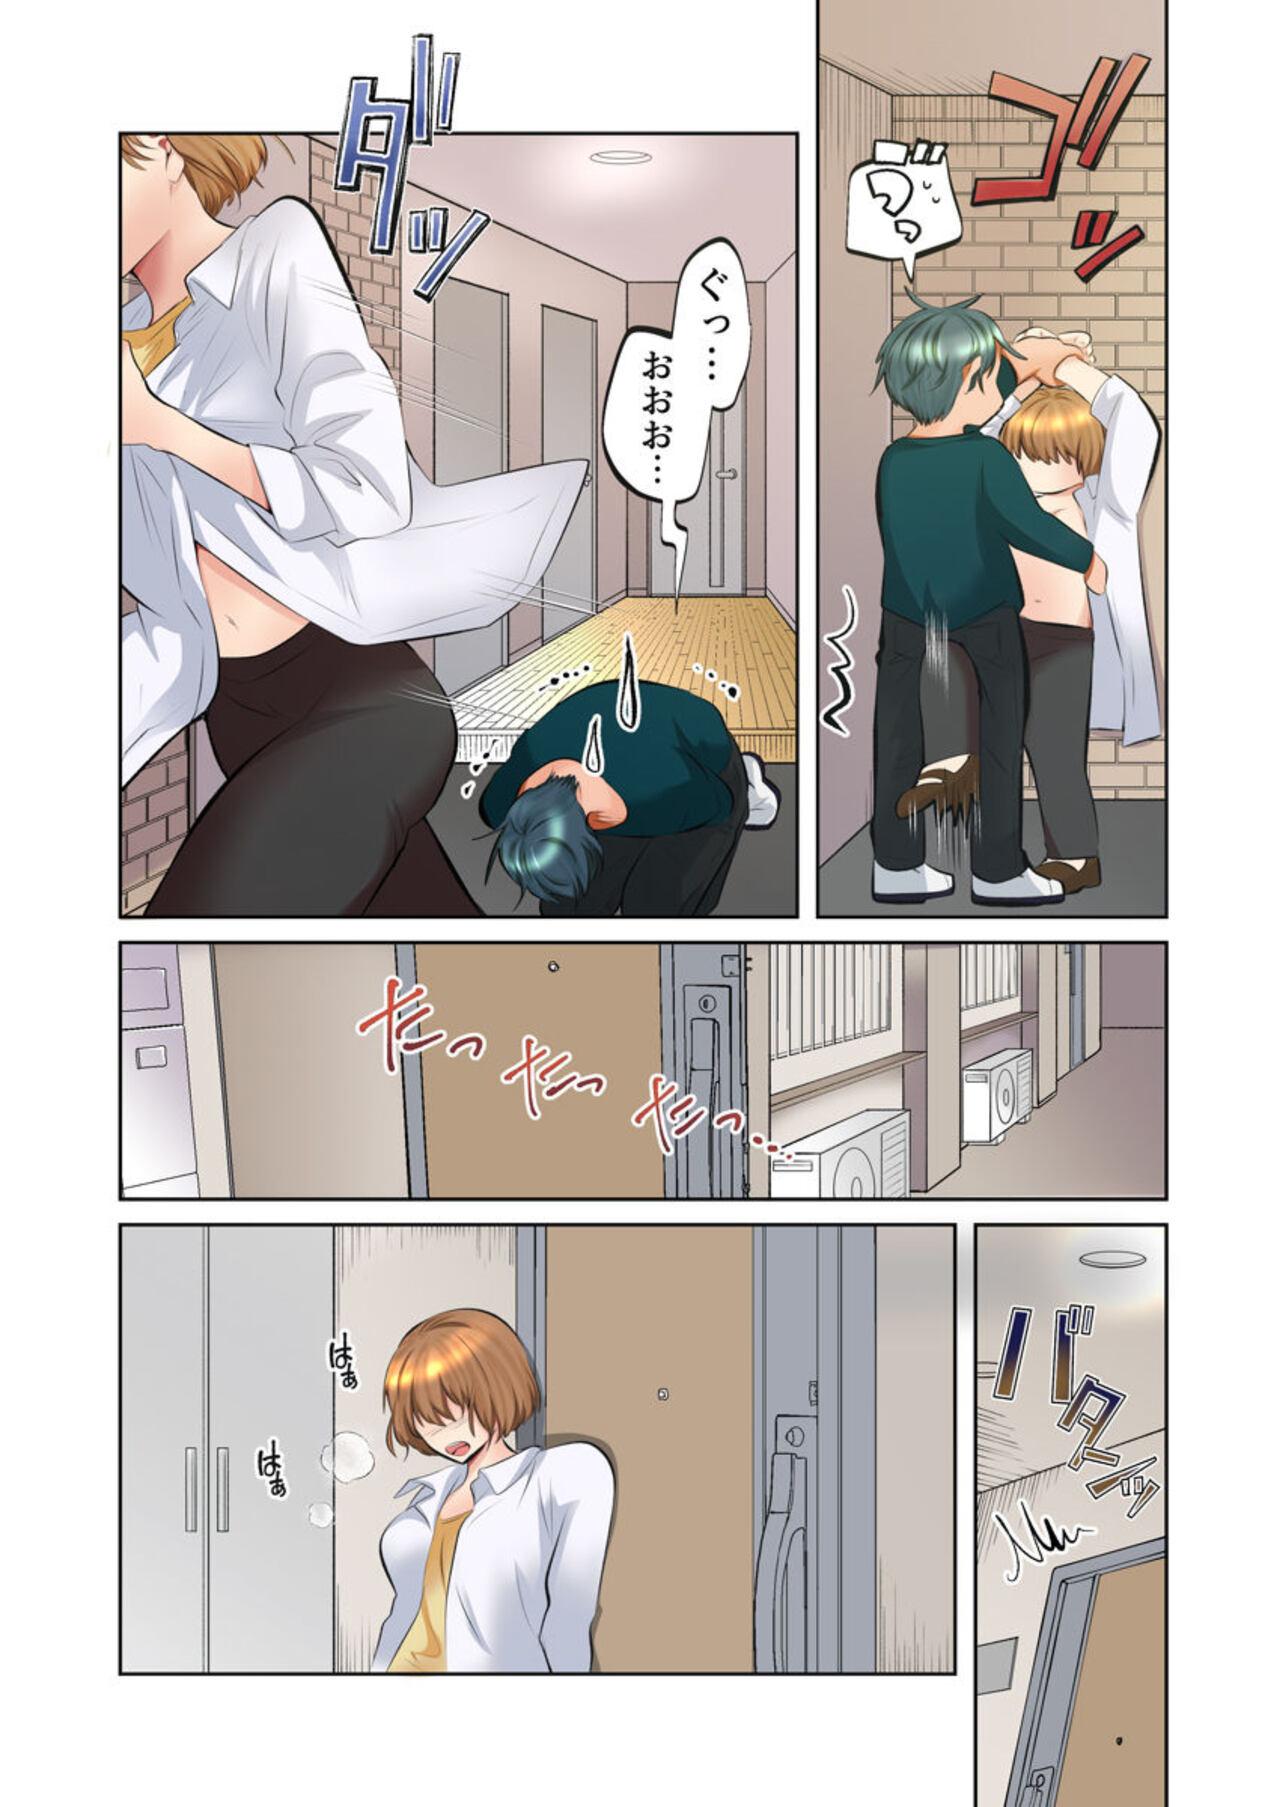 [Ika Hotaru] My Neighbor Is A Sadistic Ex-Boyfriend ~I Love My Husband, But My Aching Body Has Been Redeveloped~ (Full Color) 2 7